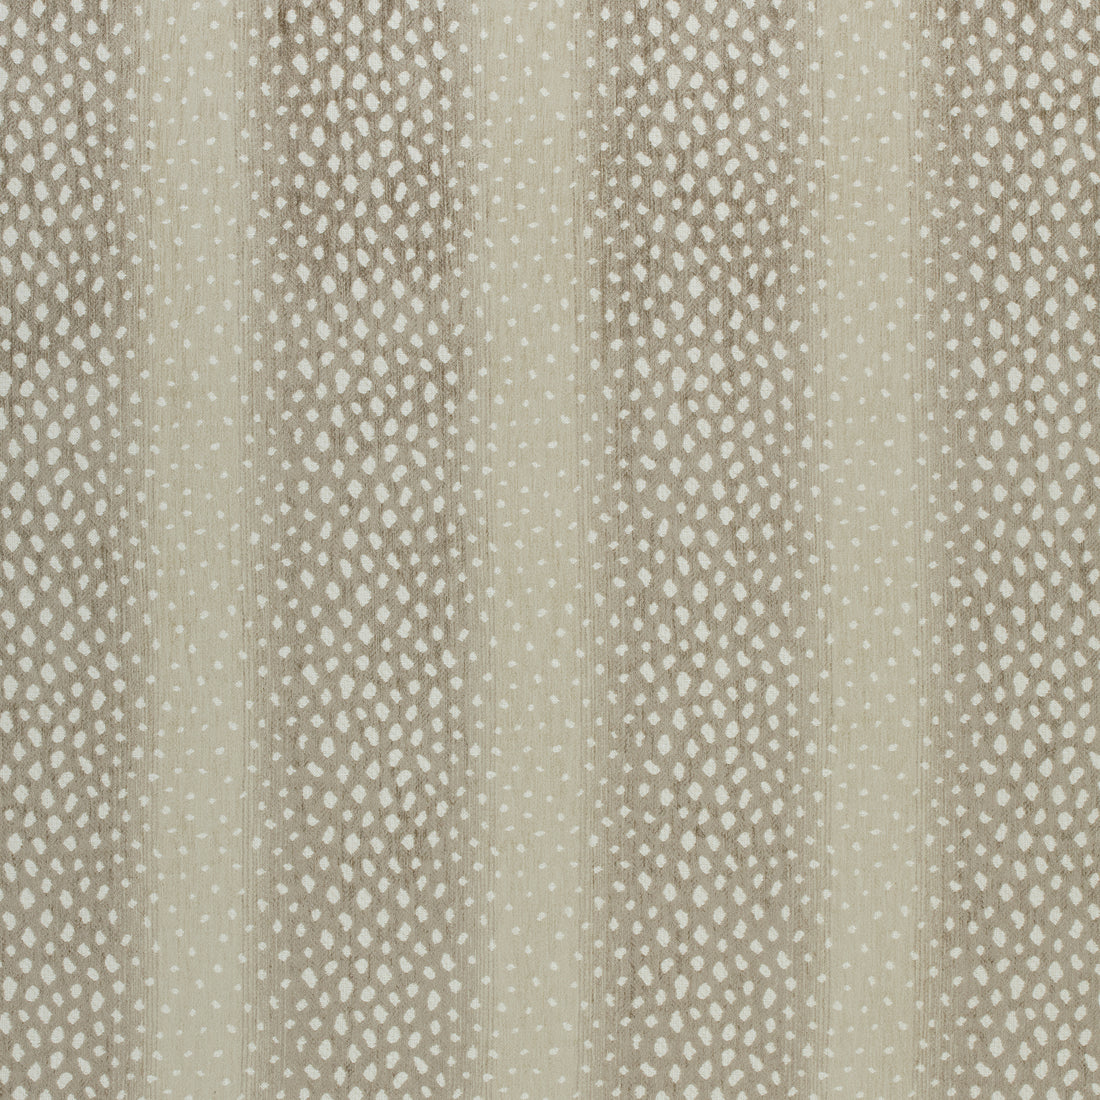 Gazelle fabric in linen color - pattern number W80430 - by Thibaut in the Woven Resource Vol 10 Menagerie collection